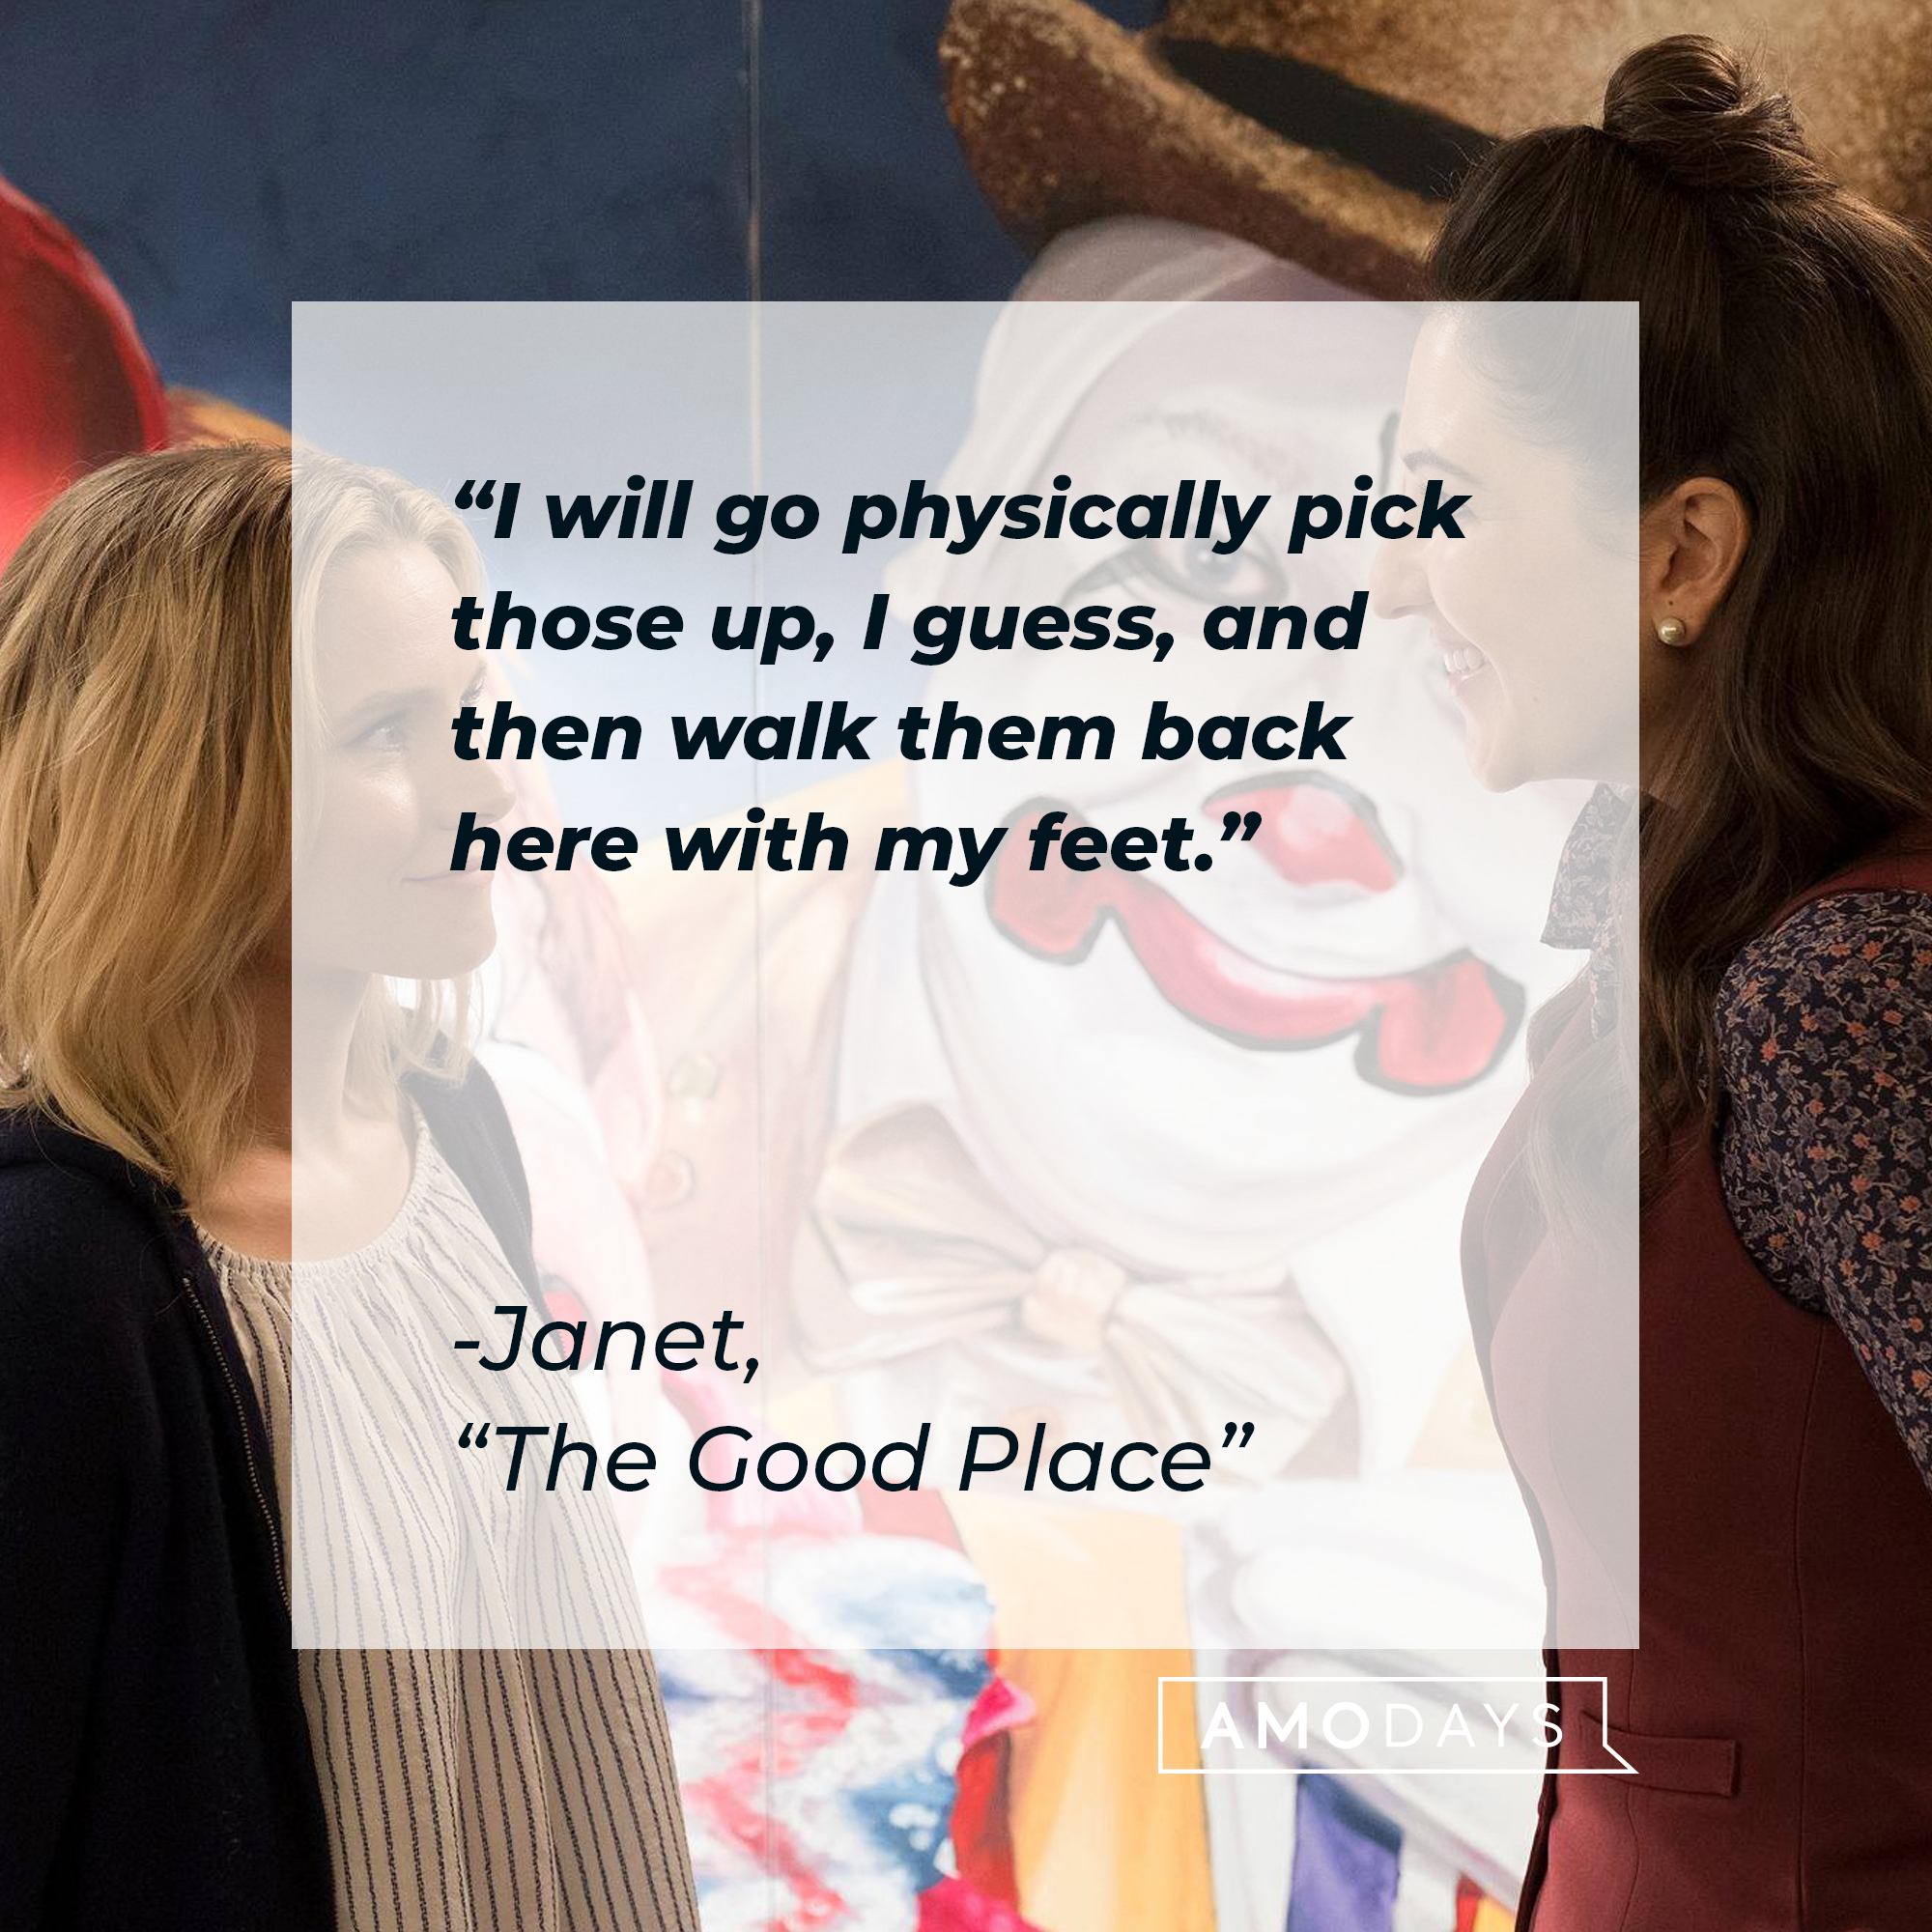 Janet's quote: “I will go physically pick those up, I guess, and then walk them back here with my feet.” | Source: facebook.com/NBCTheGoodPlace